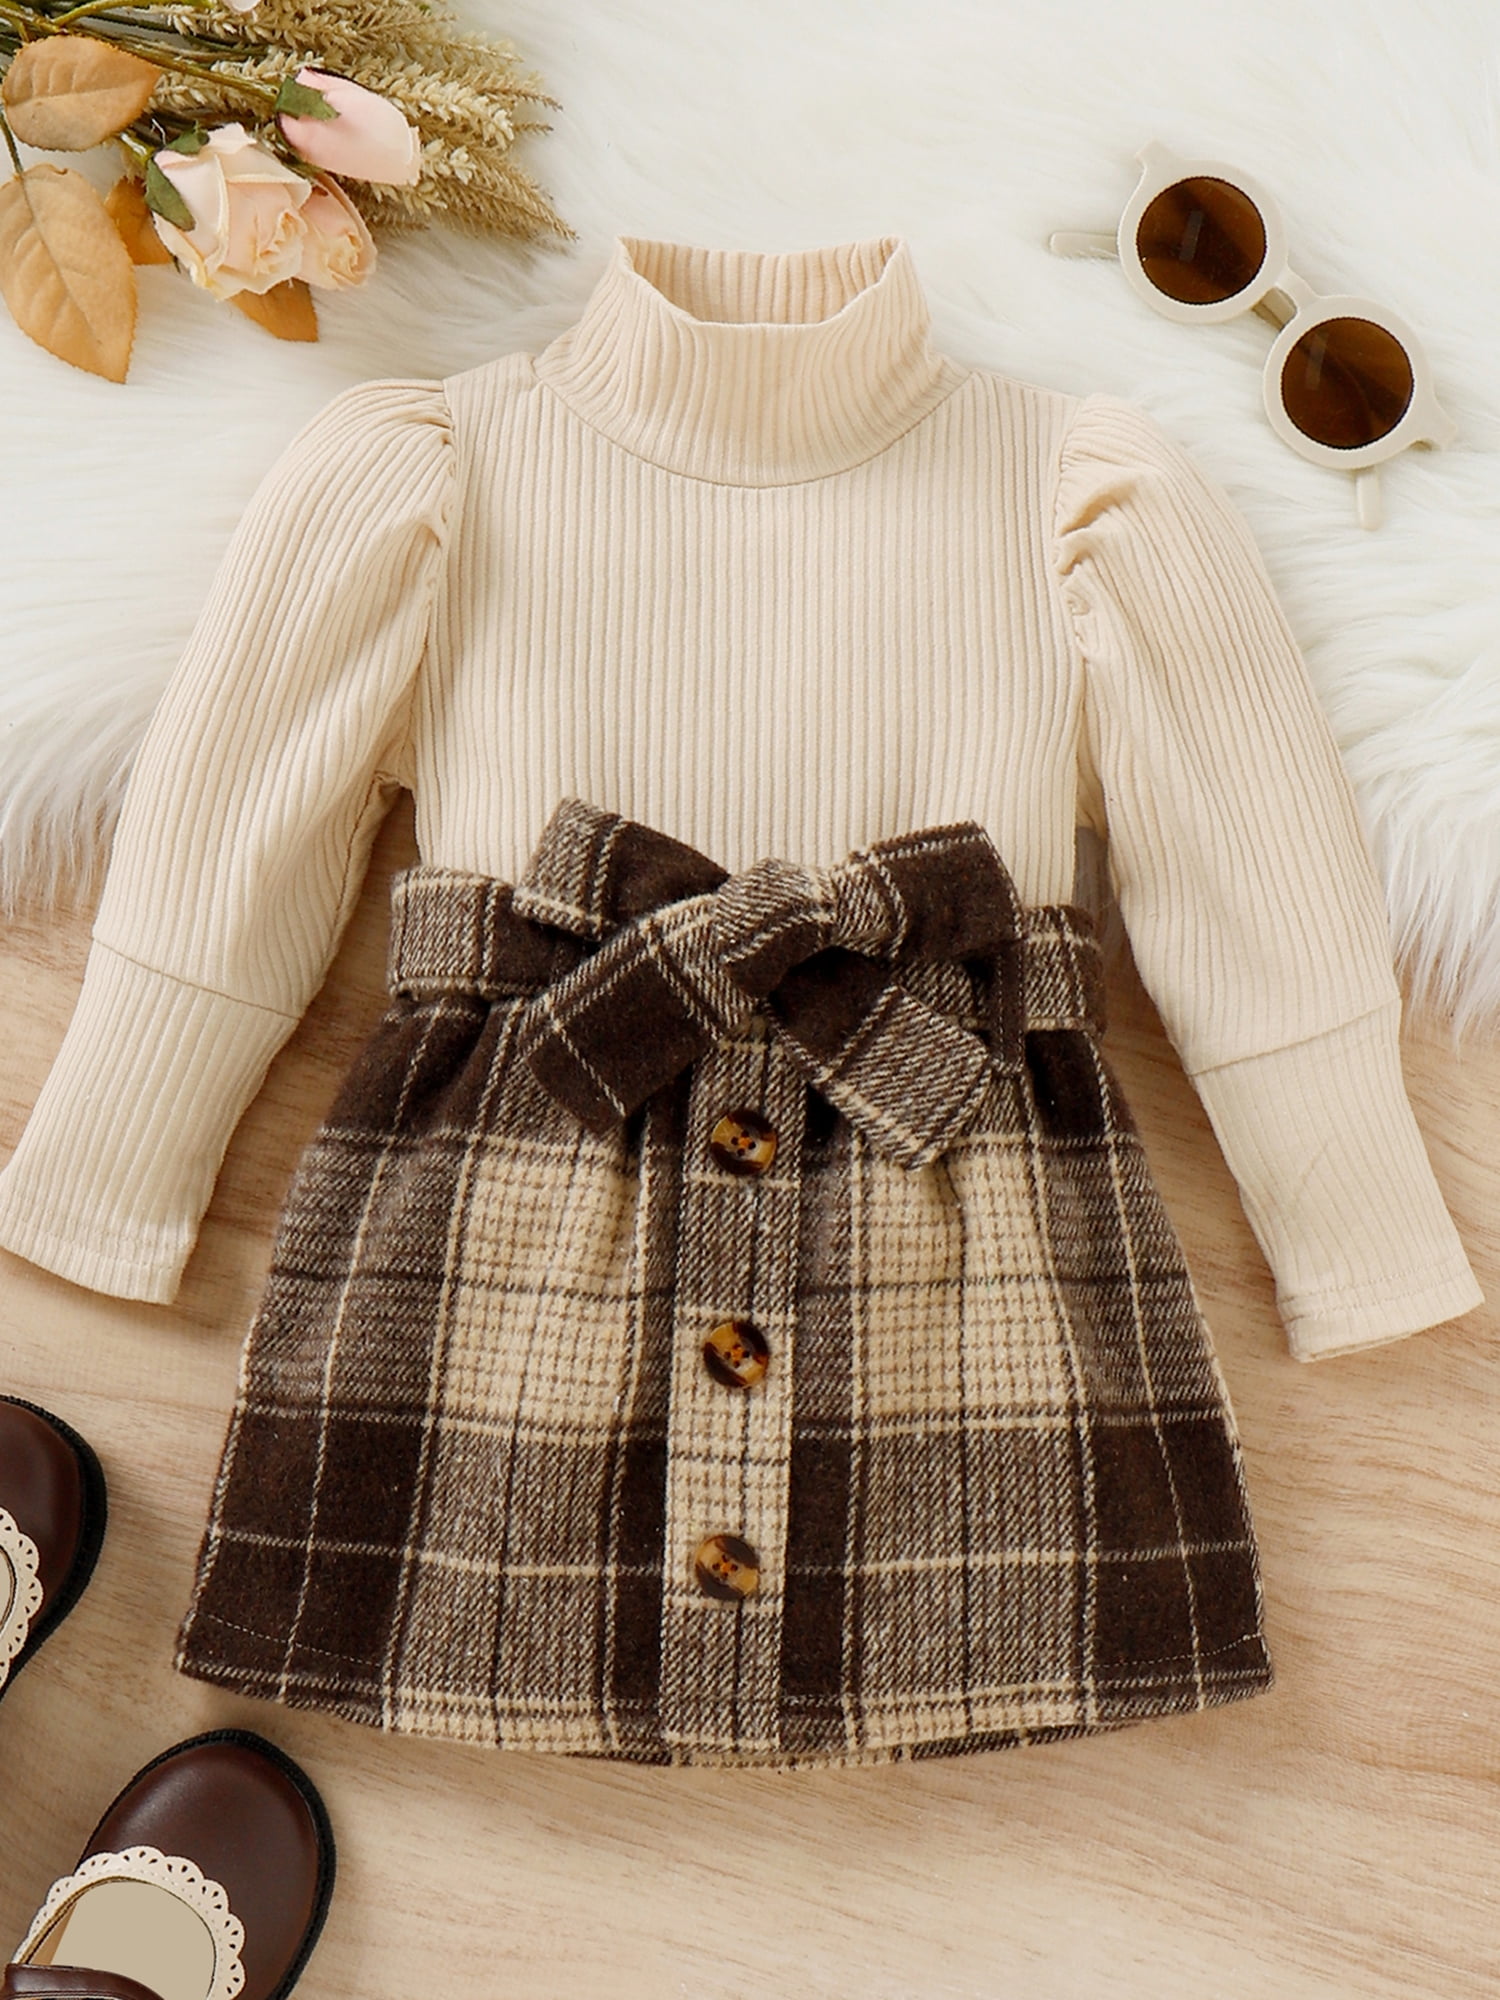 Toddler Baby Girl Skirt Outfits Turtleneck Knitted Cotton Long Sleeves Pullover  Tops Plaid Button Mini Skirts with Belt Fall Winter Clothes Set 